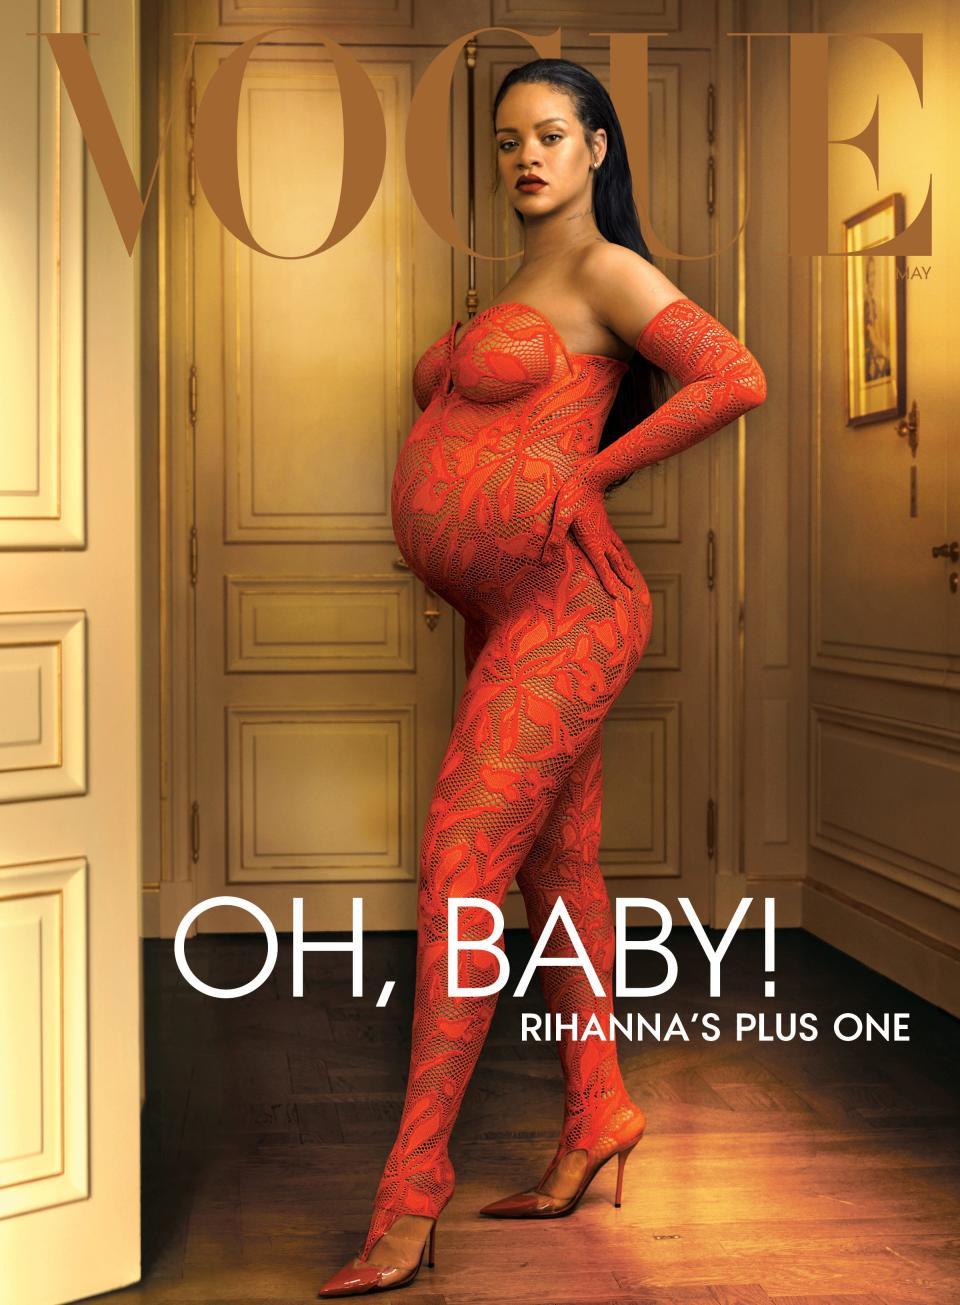 Rihanna and her baby bump grace the cover of Vogue's May issue in a red lace bodysuit.